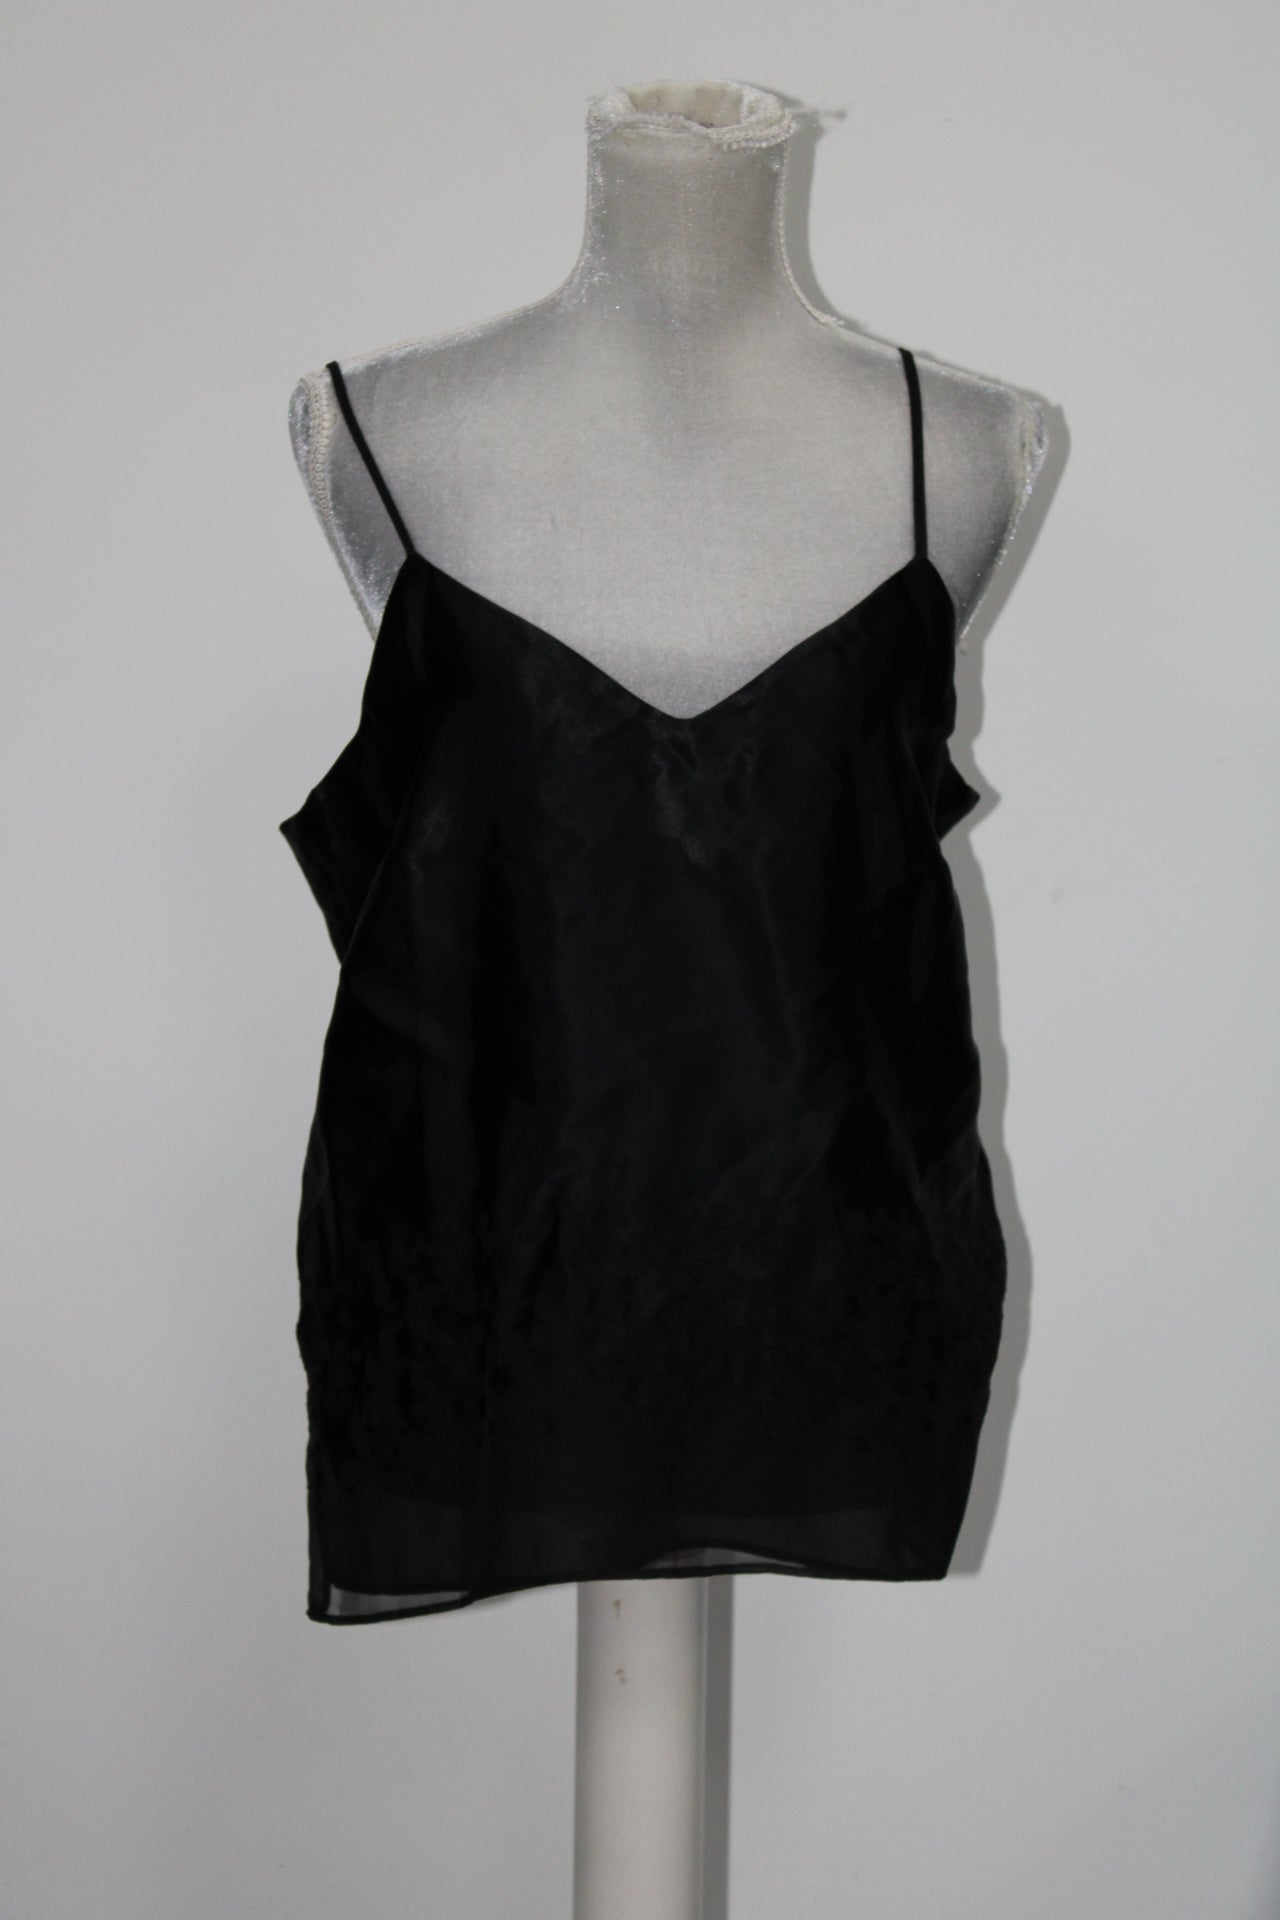 RACHEL ROY WOMEN'S CAMI TOP, BLACK, SIZE LARGE - NEW WITHOUT TAG 10702